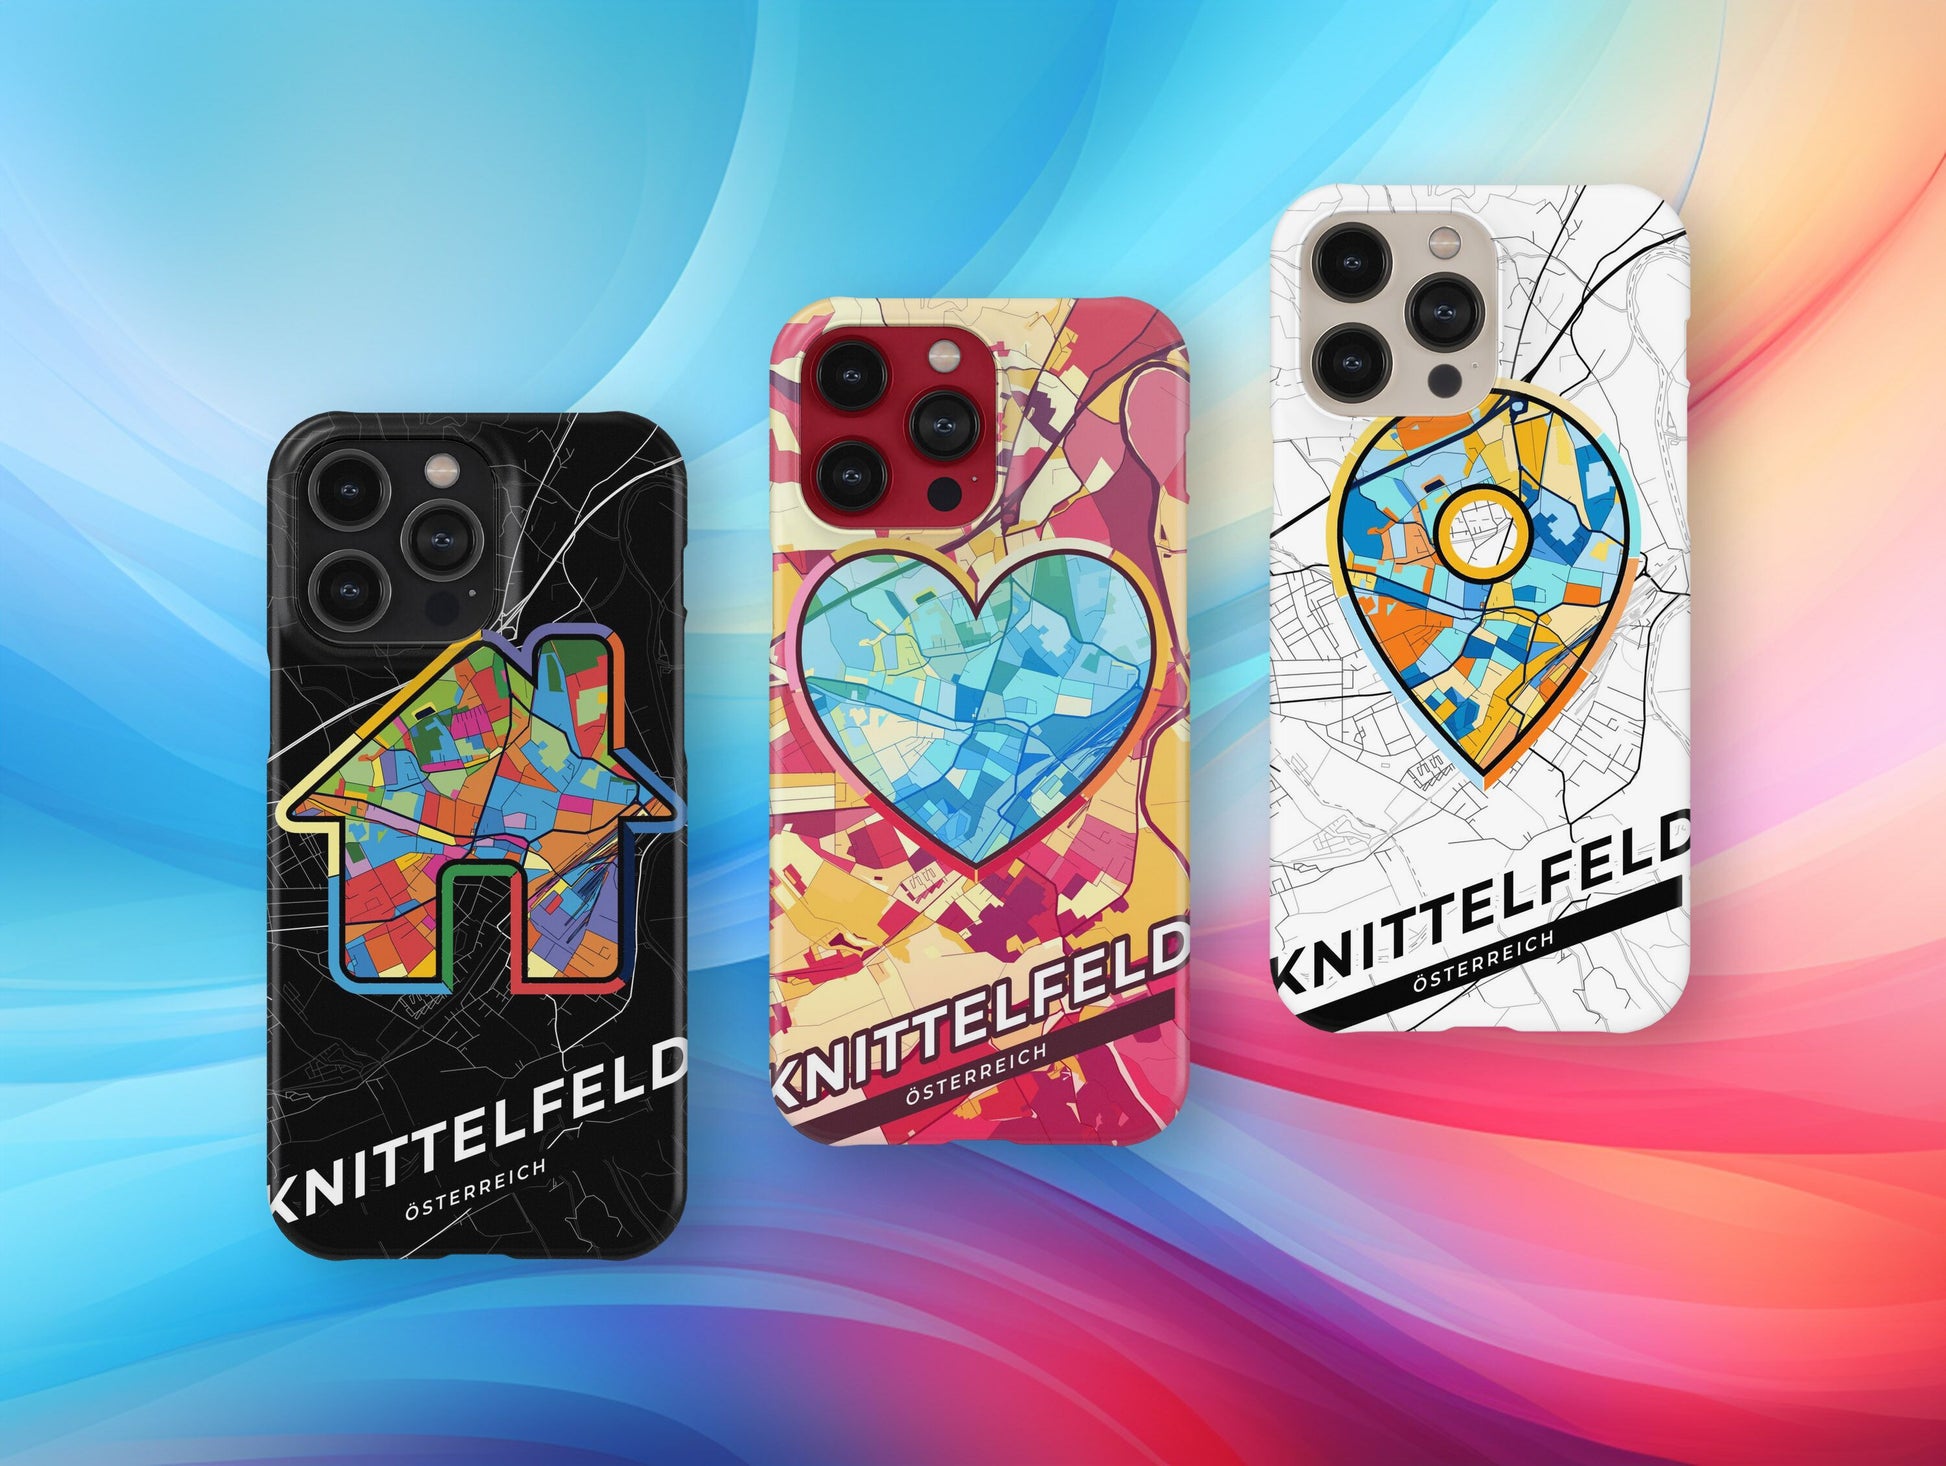 Knittelfeld Österreich slim phone case with colorful icon. Birthday, wedding or housewarming gift. Couple match cases.